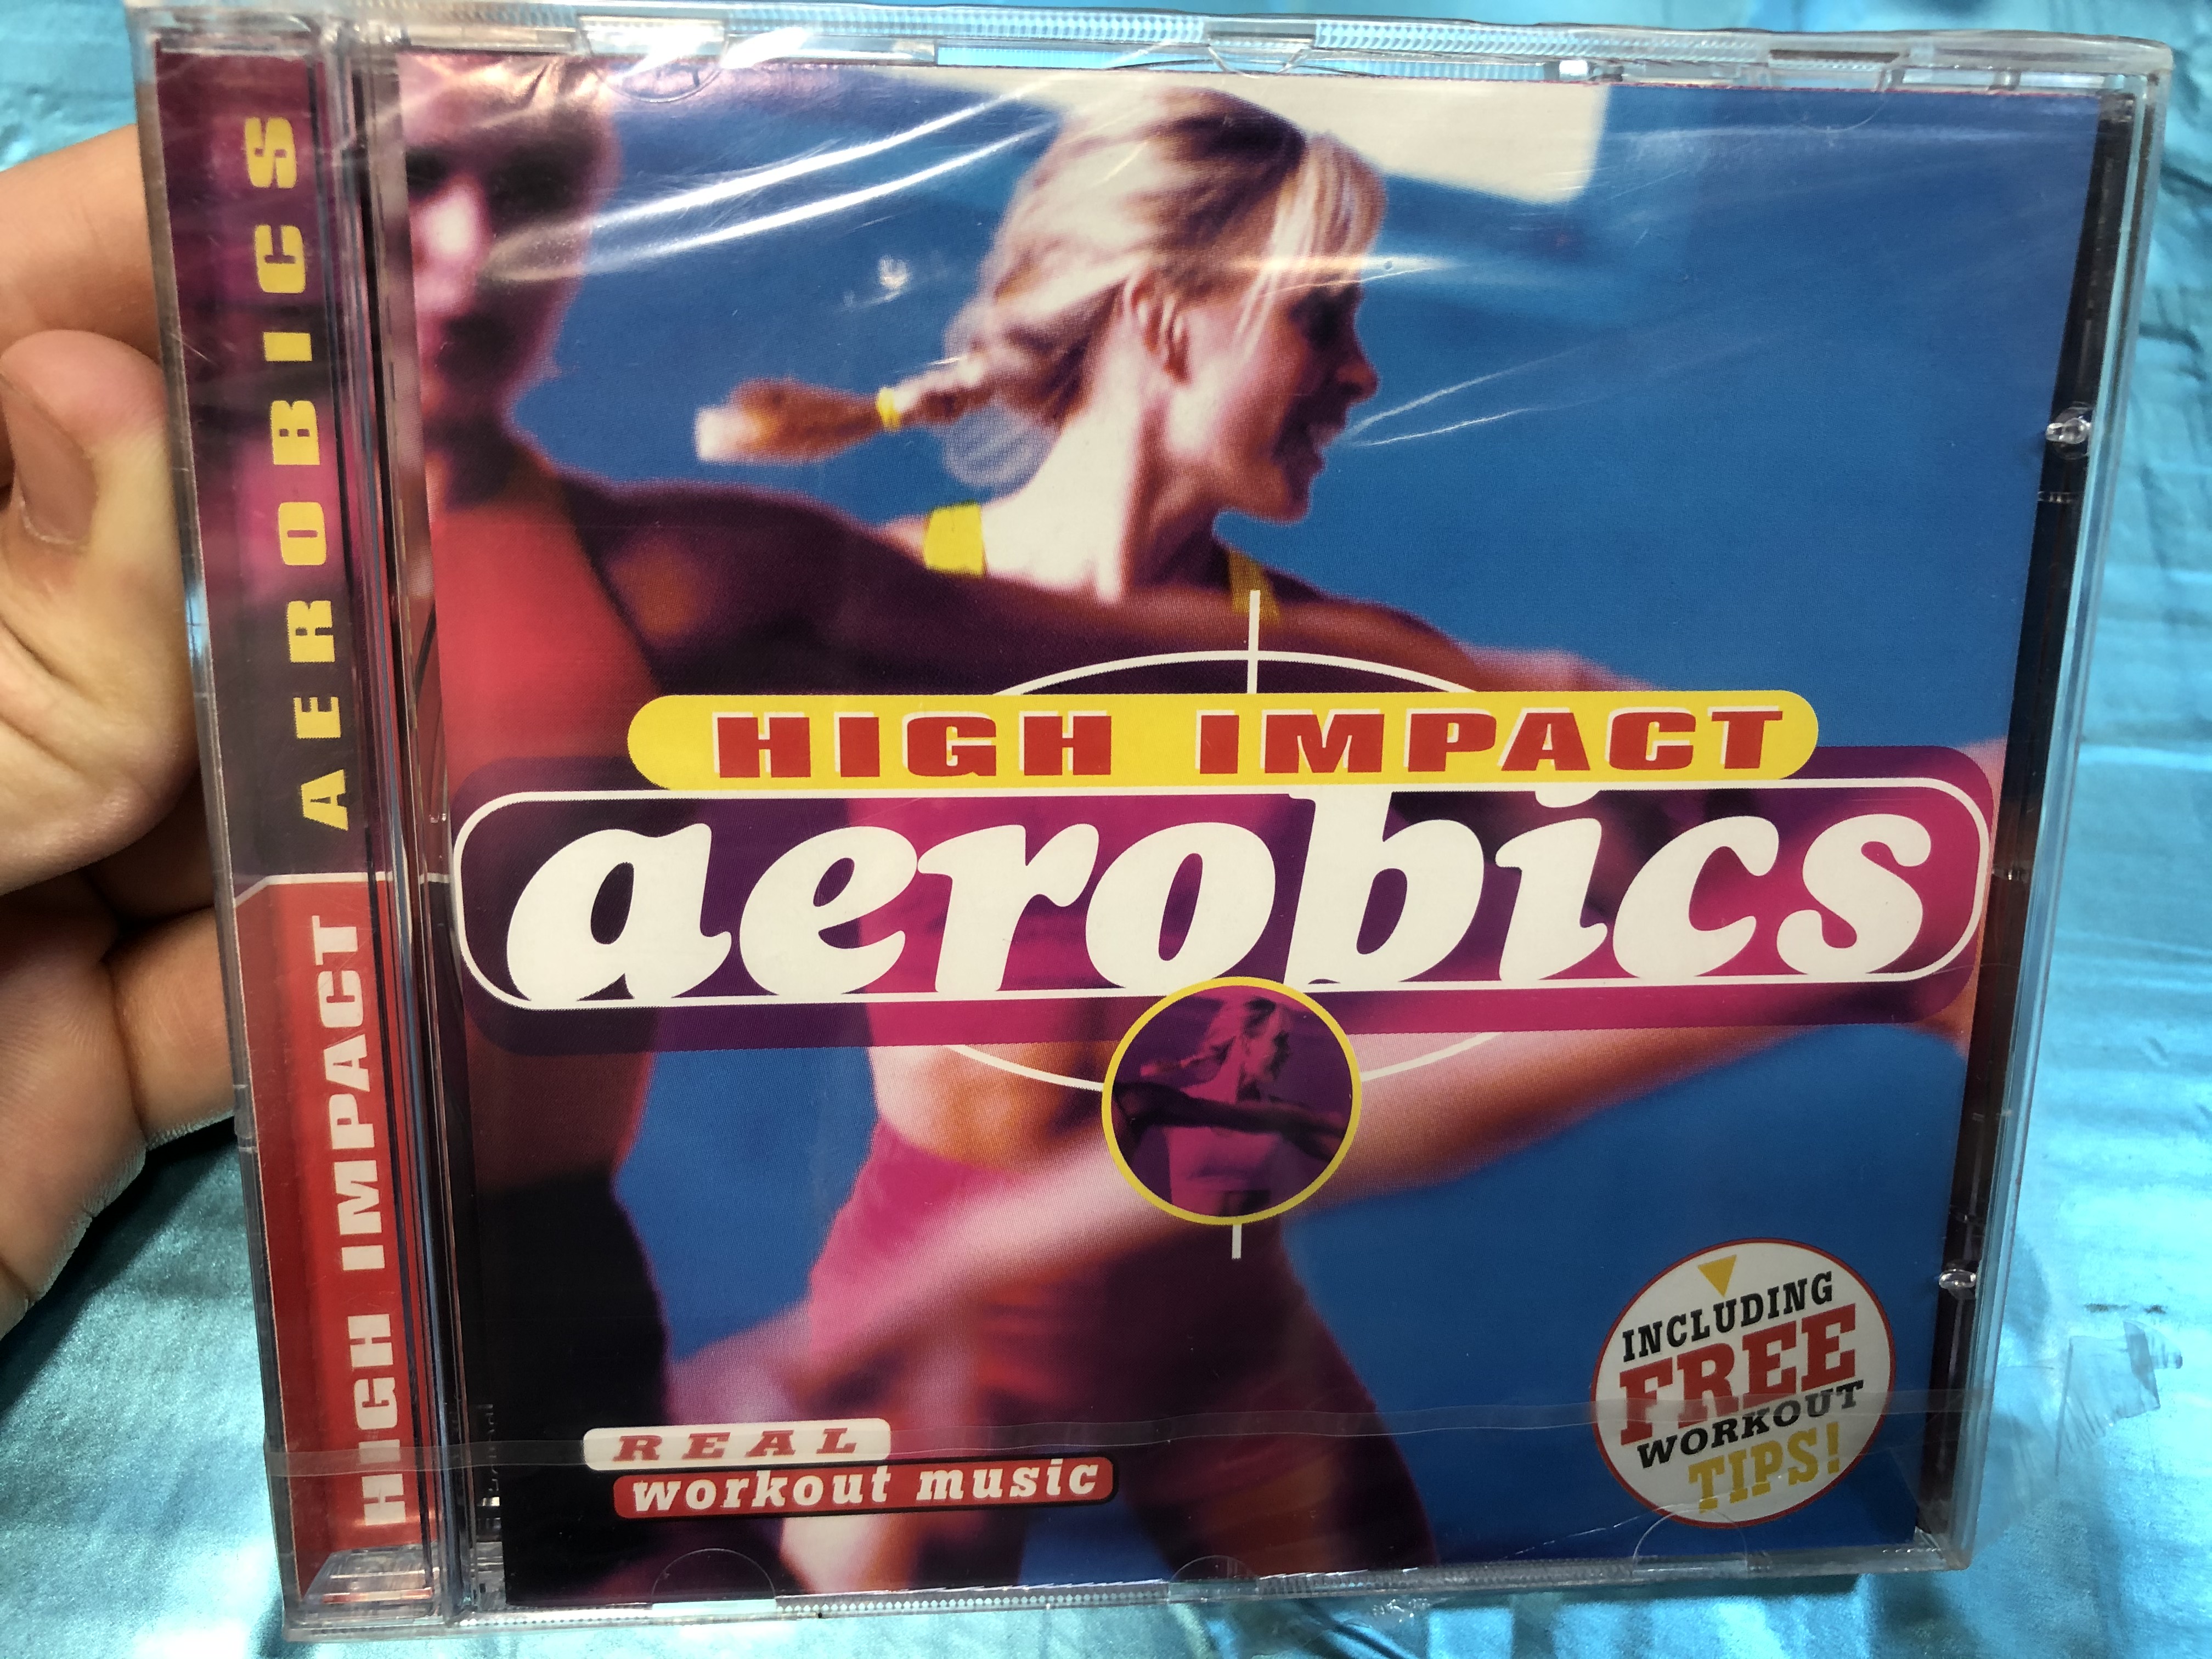 high-impact-aerobics-real-workout-music-including-free-workout-tips-disky-audio-cd-1998-dc-851342-1-.jpg